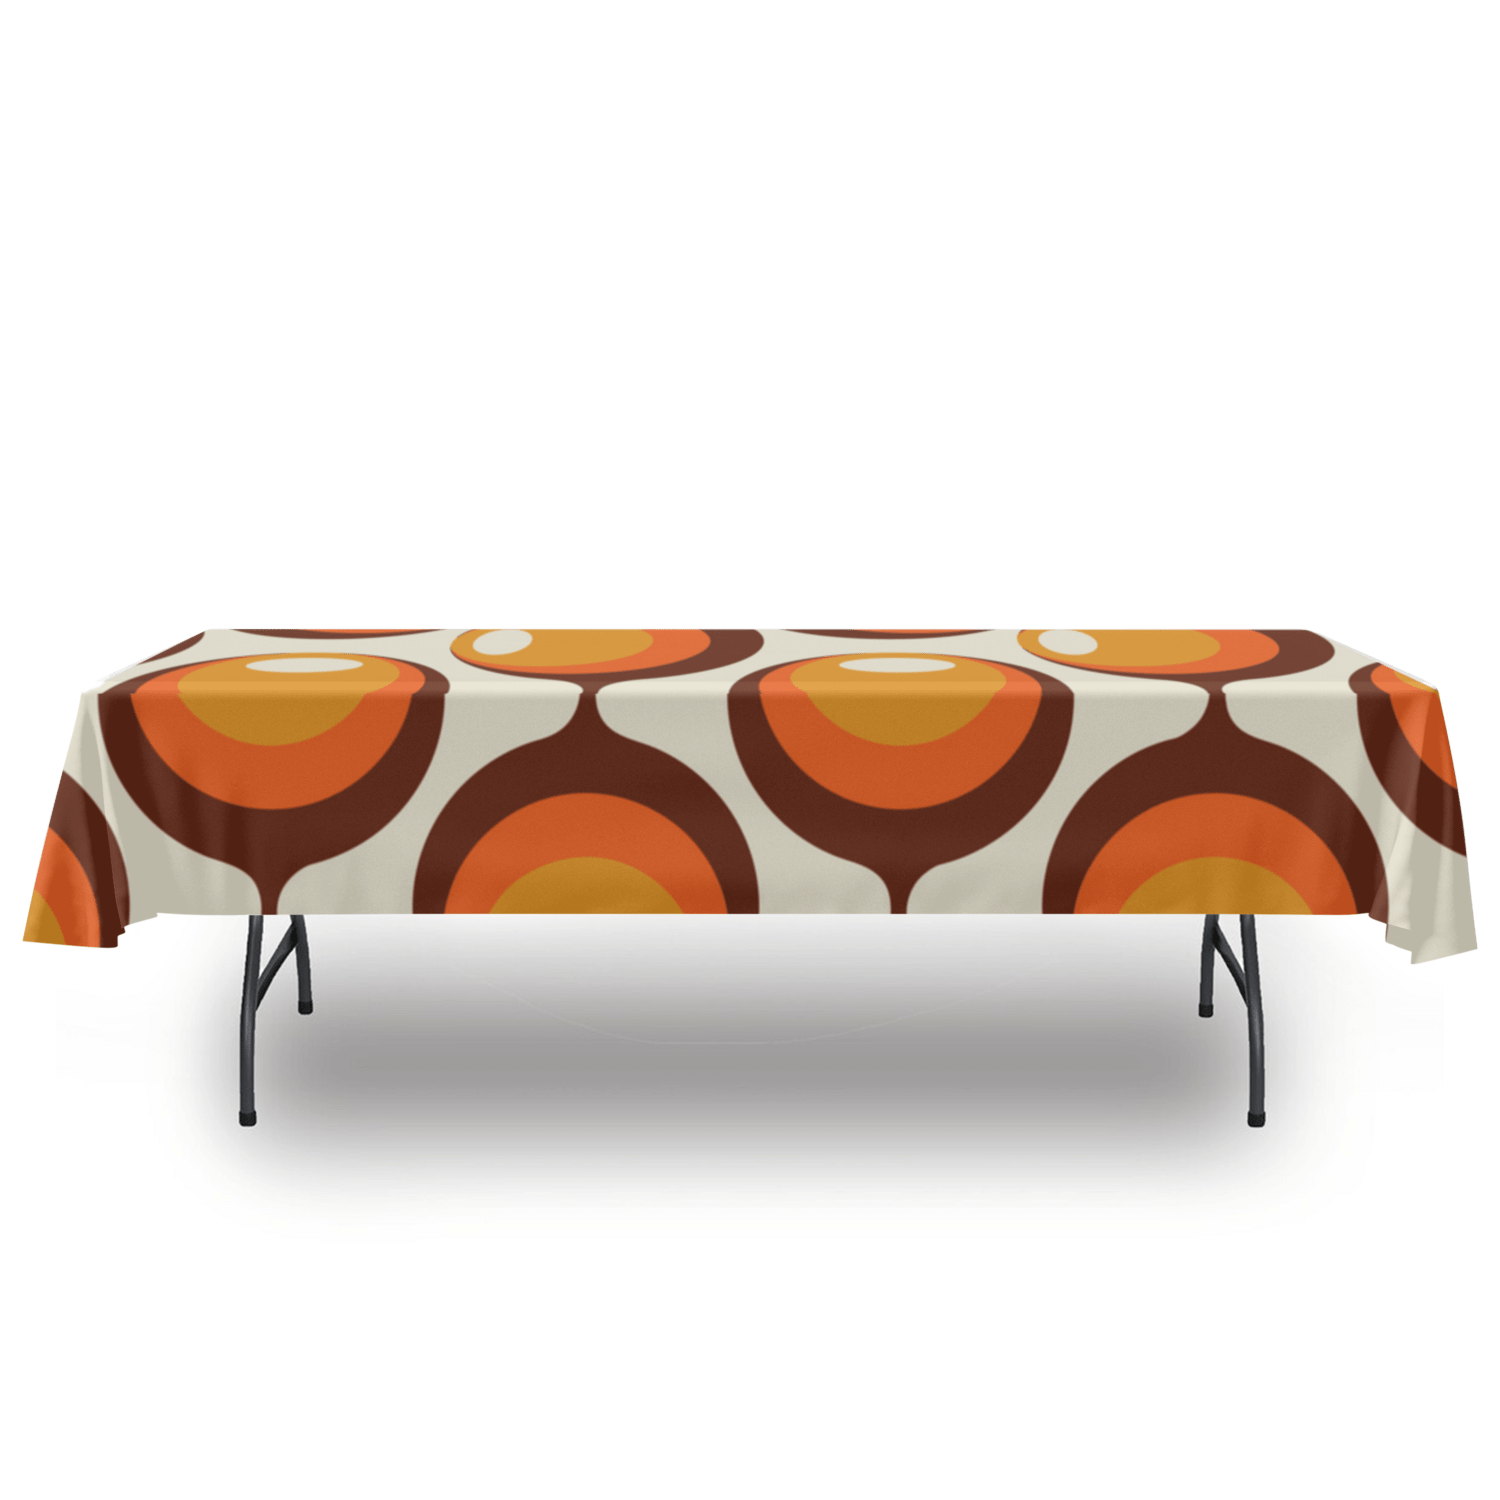 kate-mcenroe-nyc Mid Century Modern Retro Groovy Orbs Tablecloth, Atomic Age Vintage Style Orange, Brown, Yellow Table Linens Tablecloths 54&quot; x 120&quot; 108349